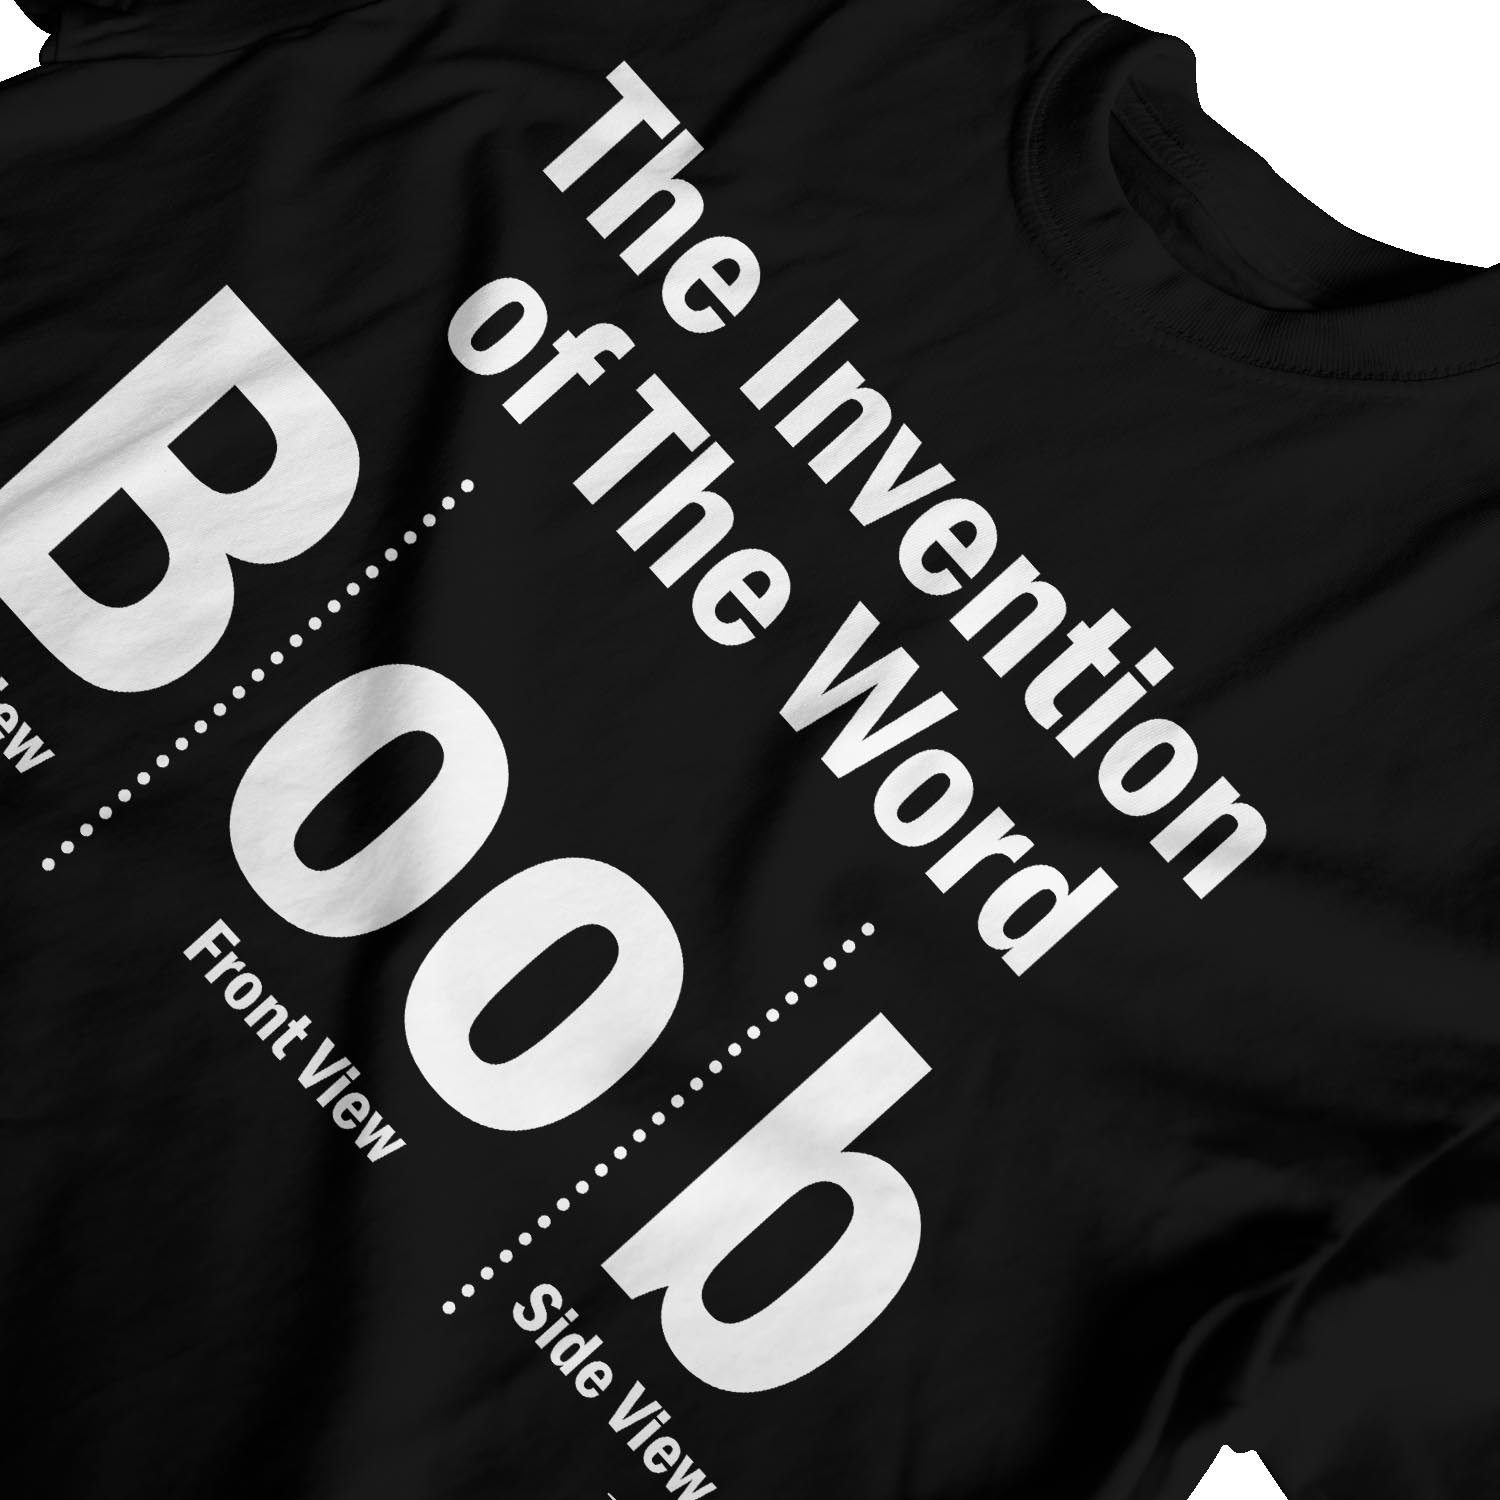 The Invention Of The Word Boob shirt